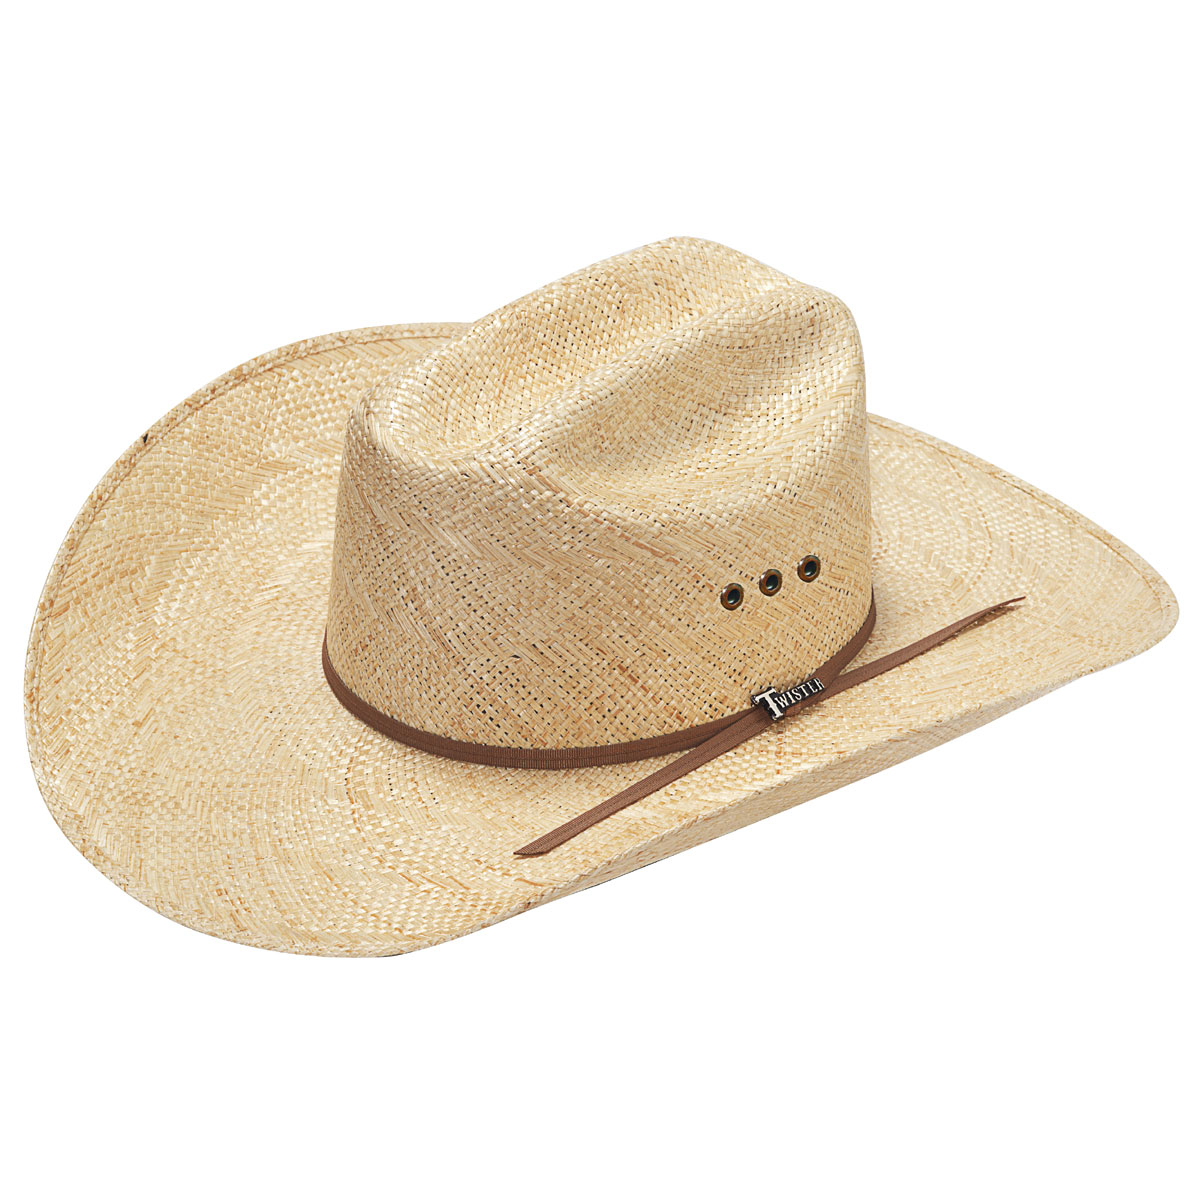 **Twister Sisal Western Hat - 2-Cord Golden Brown Band